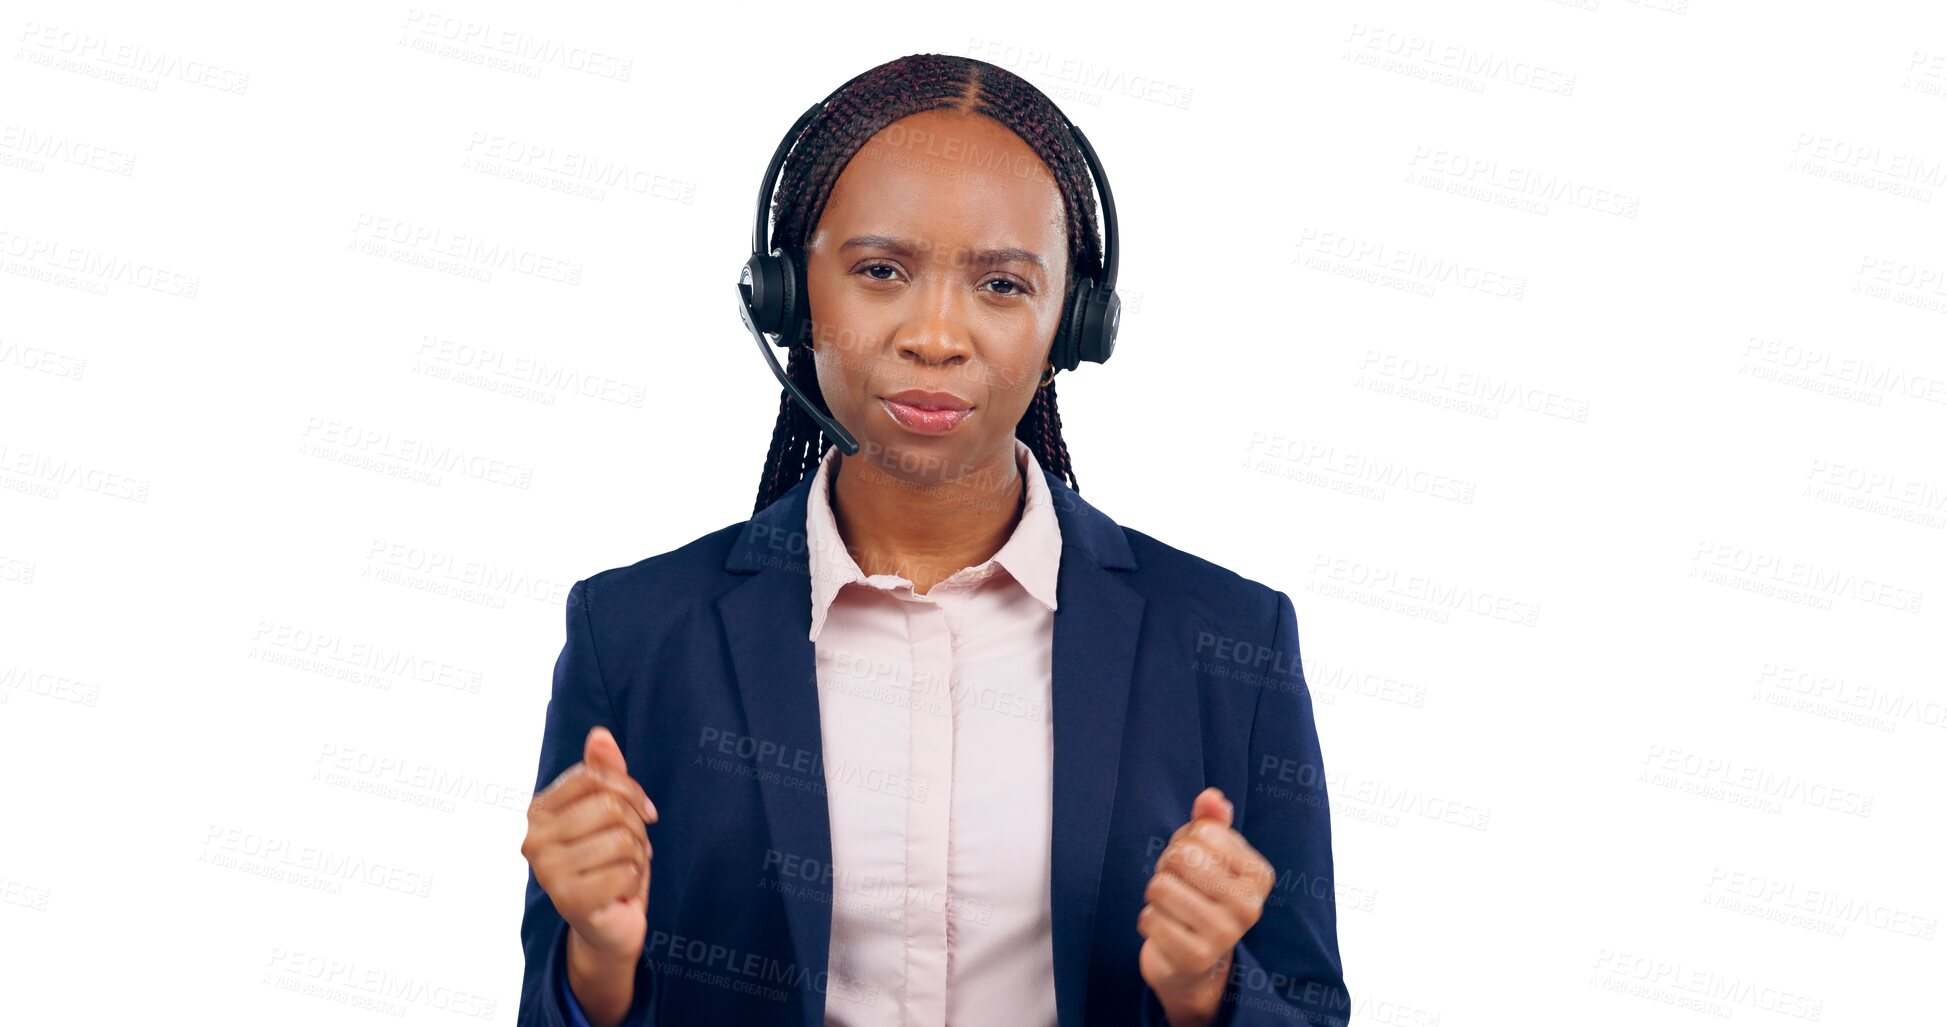 Buy stock photo Call center, woman and portrait for customer service, communication or CRM questions. IT support or telemarketing agent or african consultant with microphone isolated on a transparent, png background